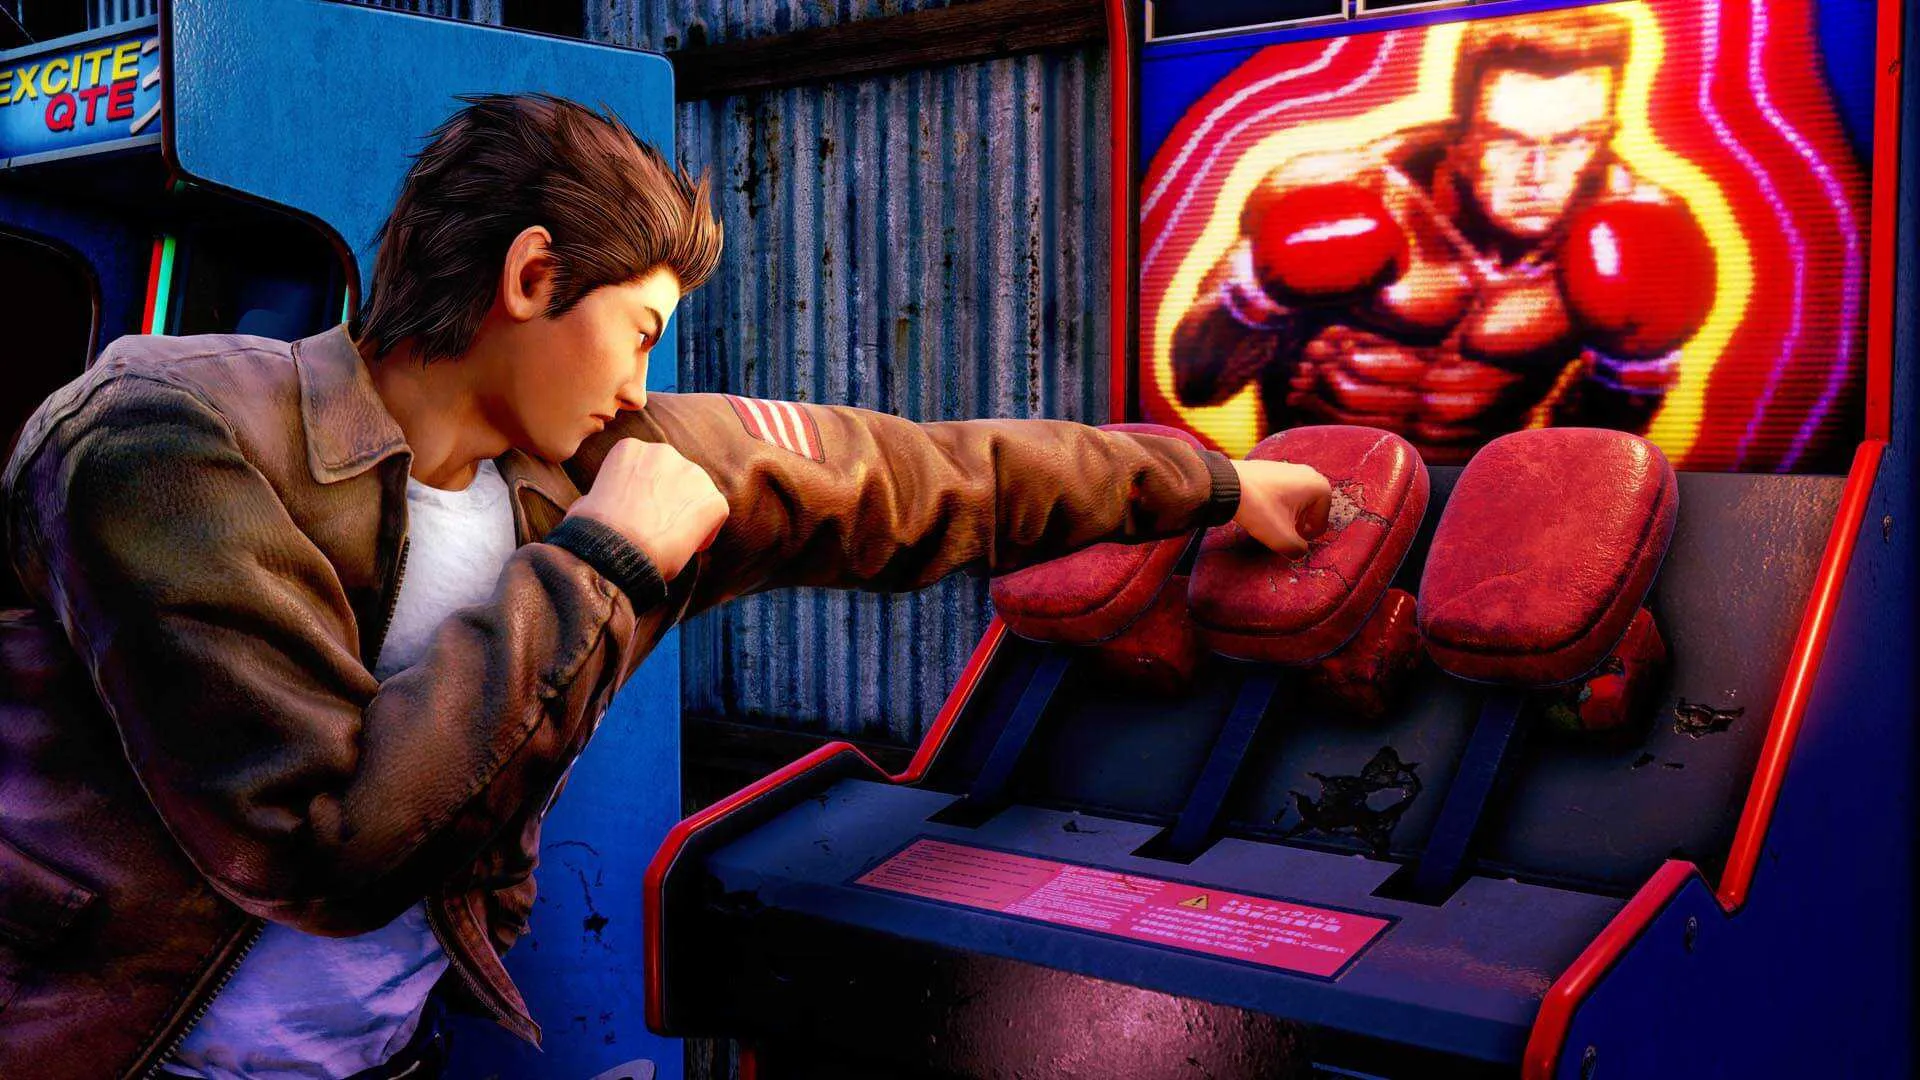 shenmue3 review 2f1574800305